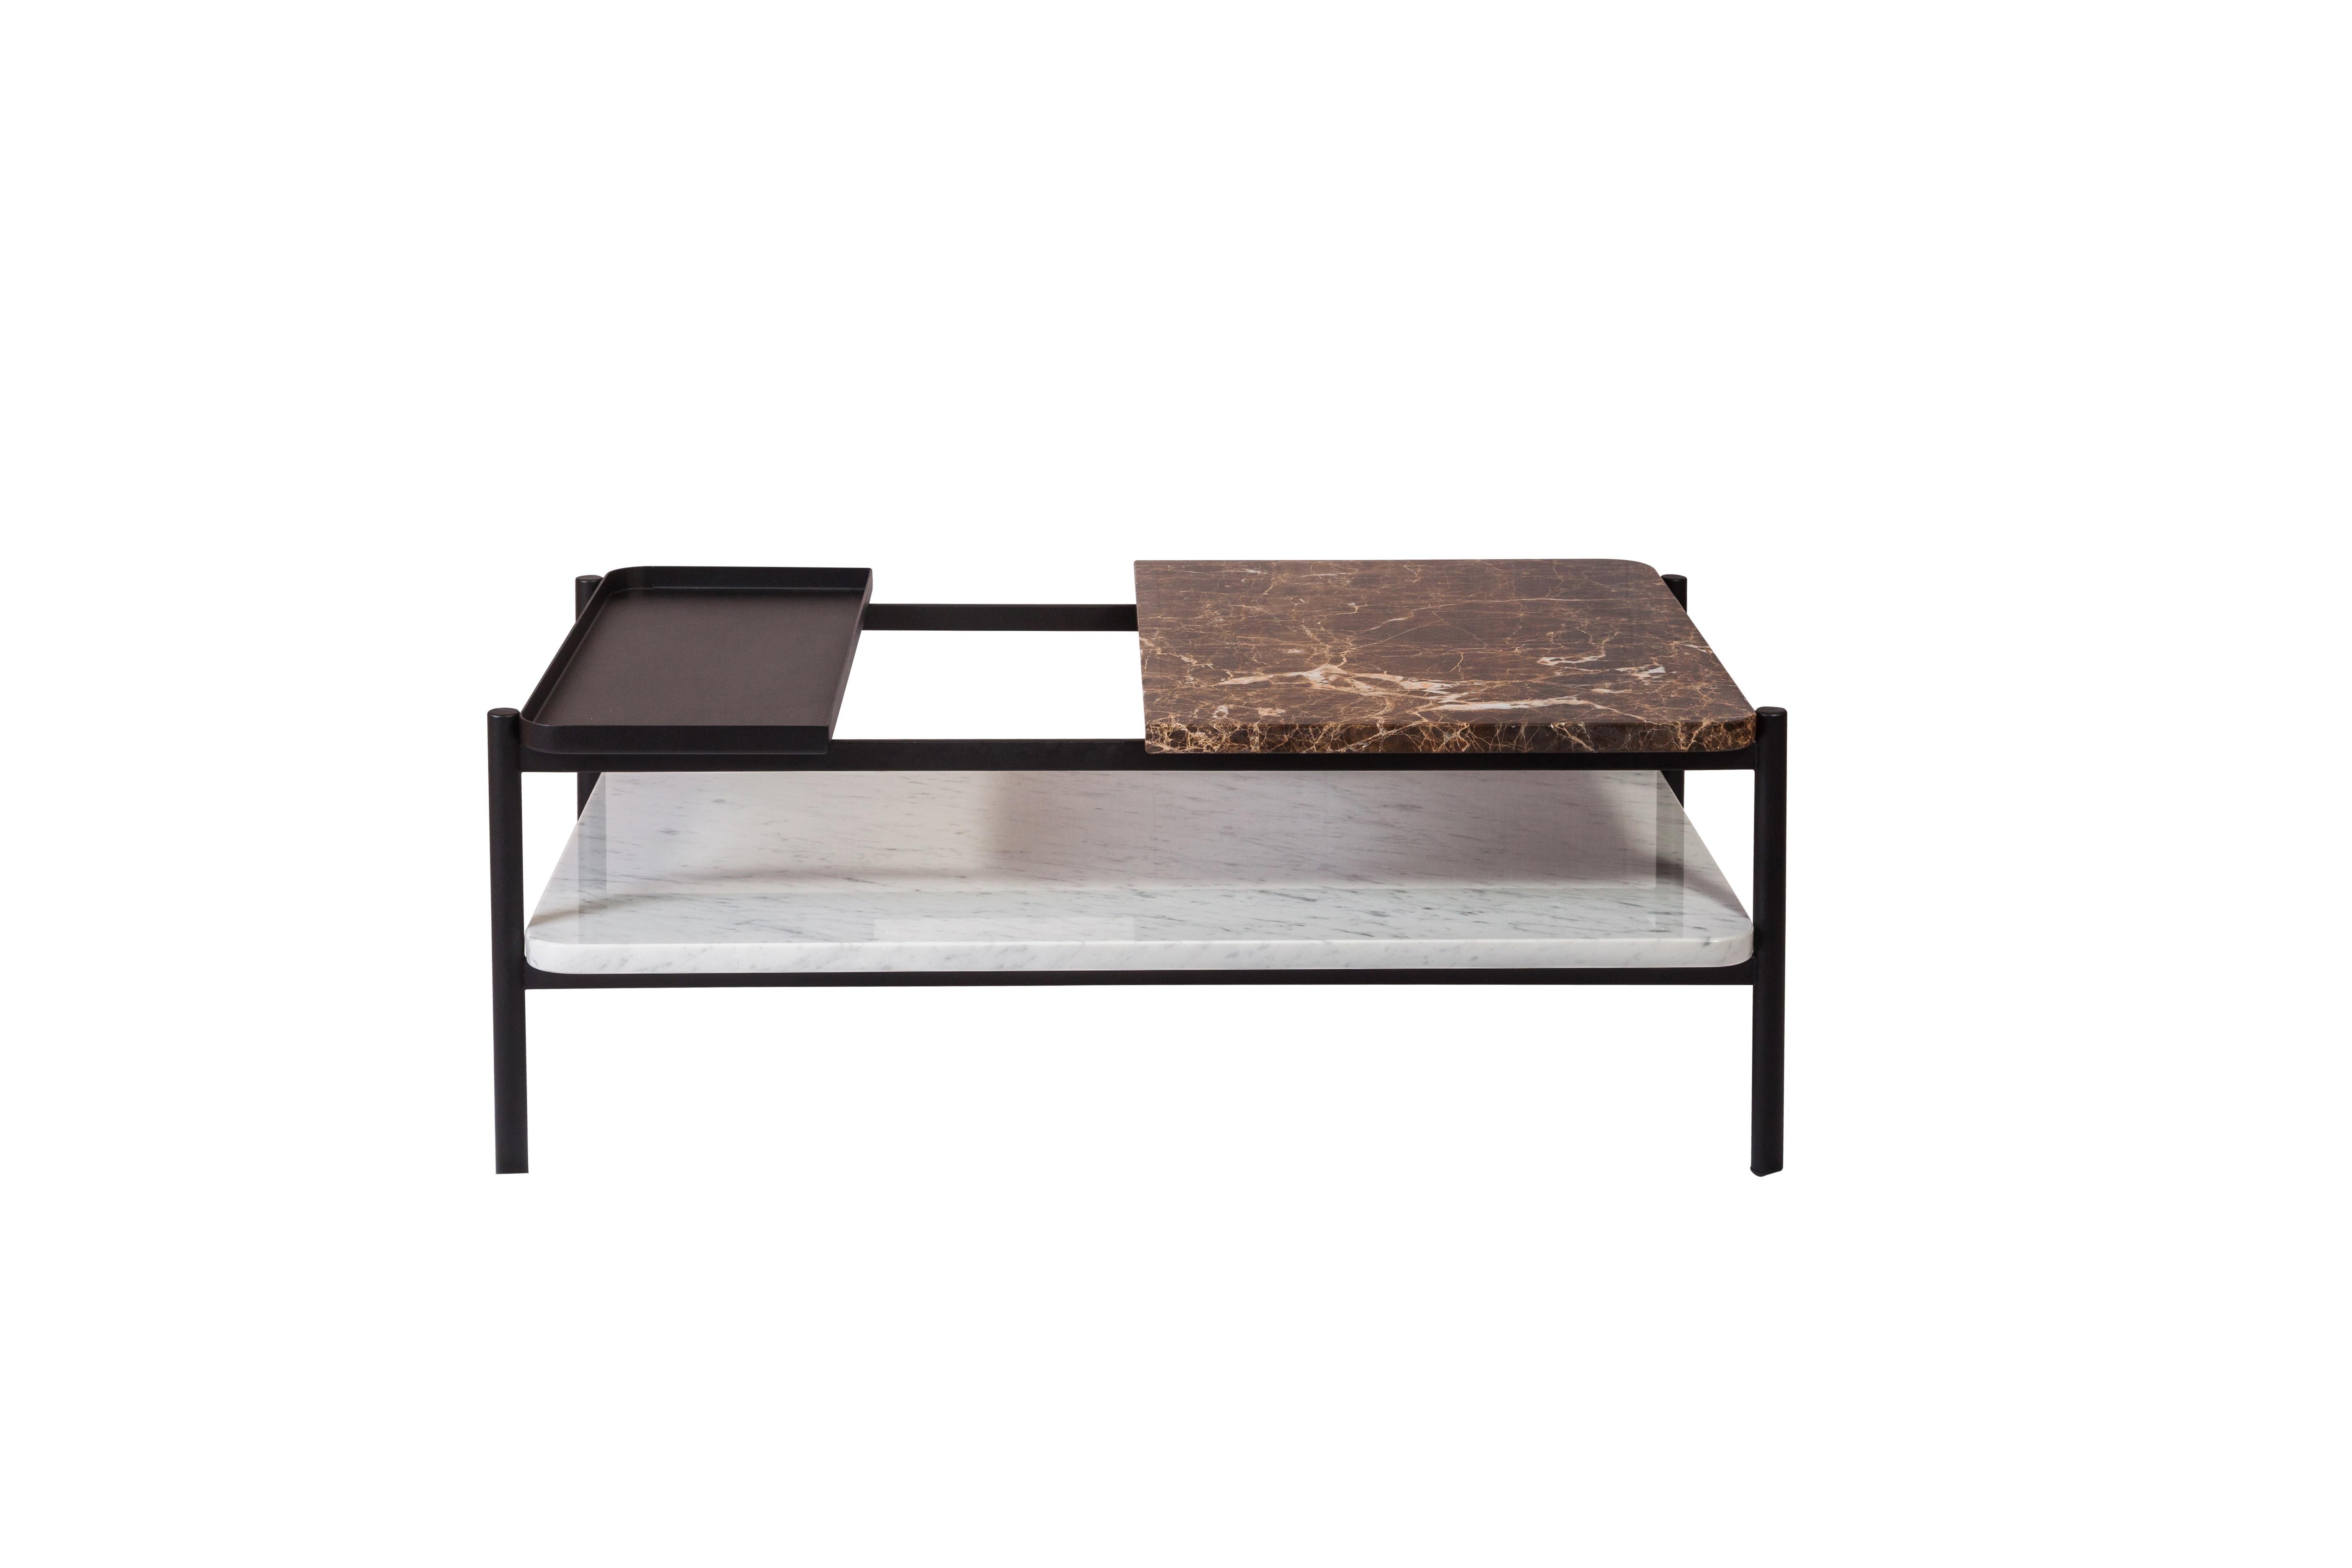 Bagnères Coffee Table Emperador ‘Brown’ and Arabescato ‘White’ Marble and Metal In Excellent Condition For Sale In Arudy, Aquitaine